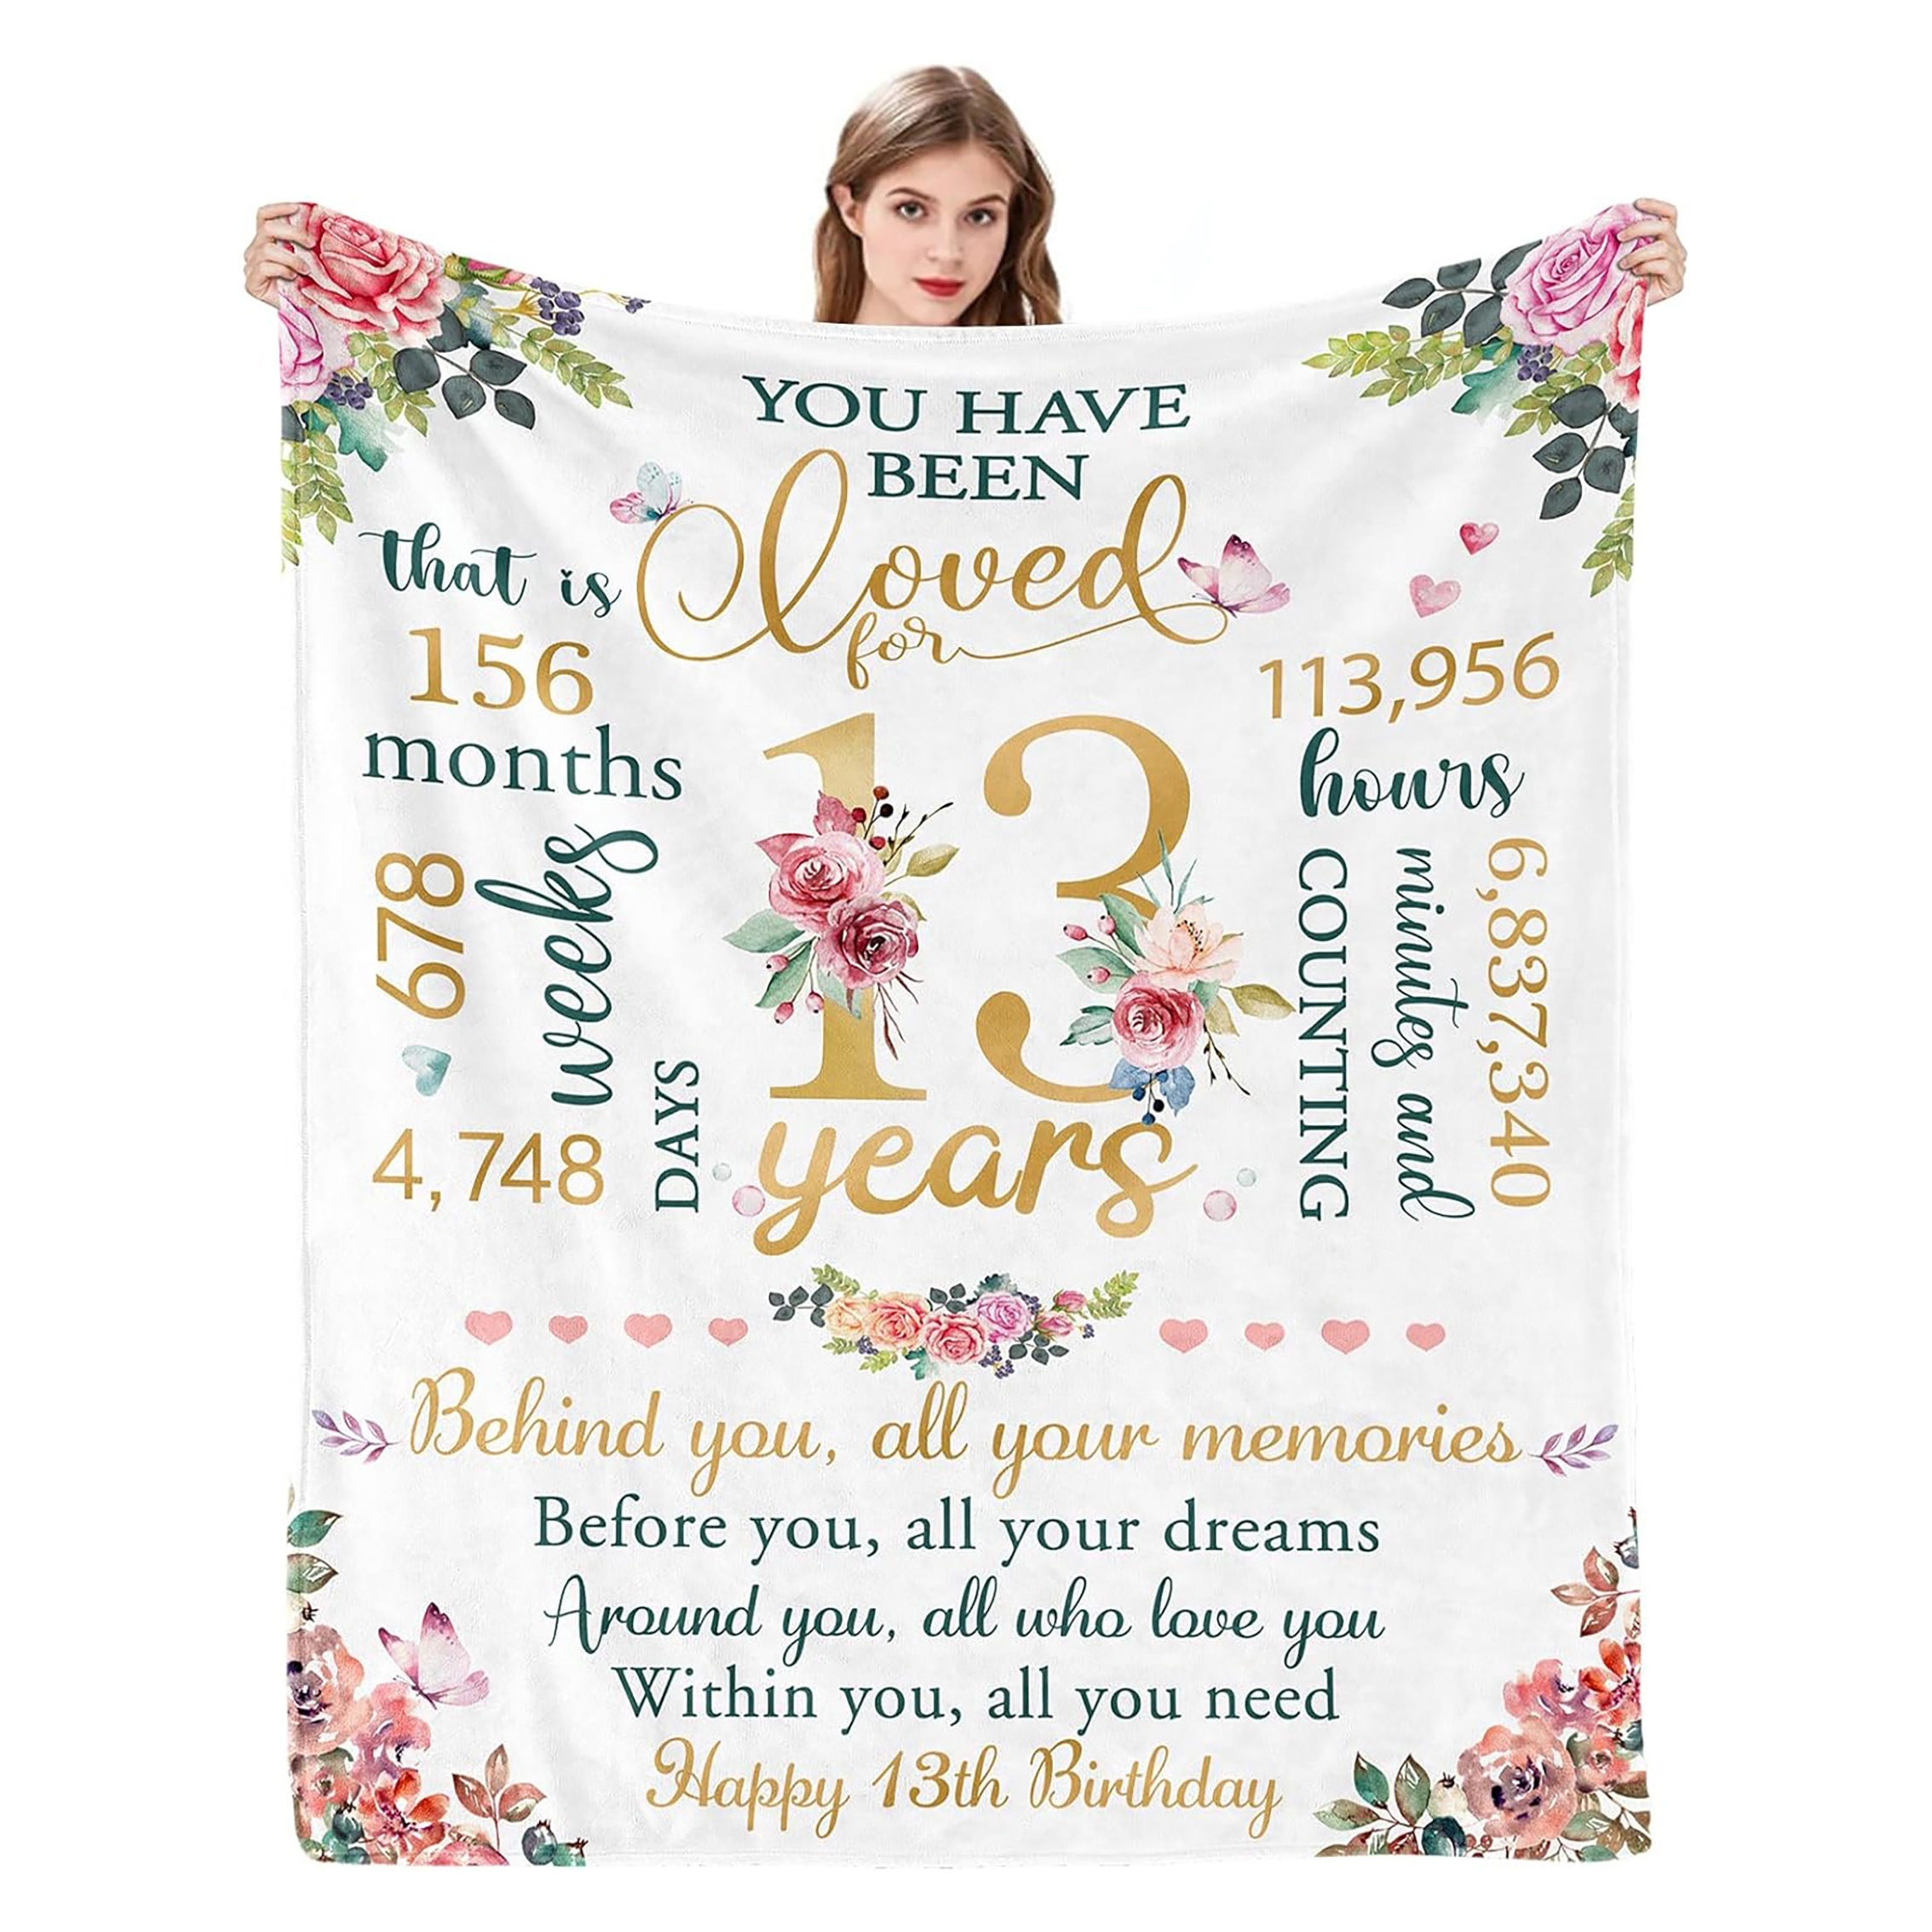 18th Birthday Gifts for Girls, 18th Birthday Gifts with Gift Box, 18 Year  Old Girl Birthday Gifts, Gifts for 18 Year Old Girl, 18th Birthday